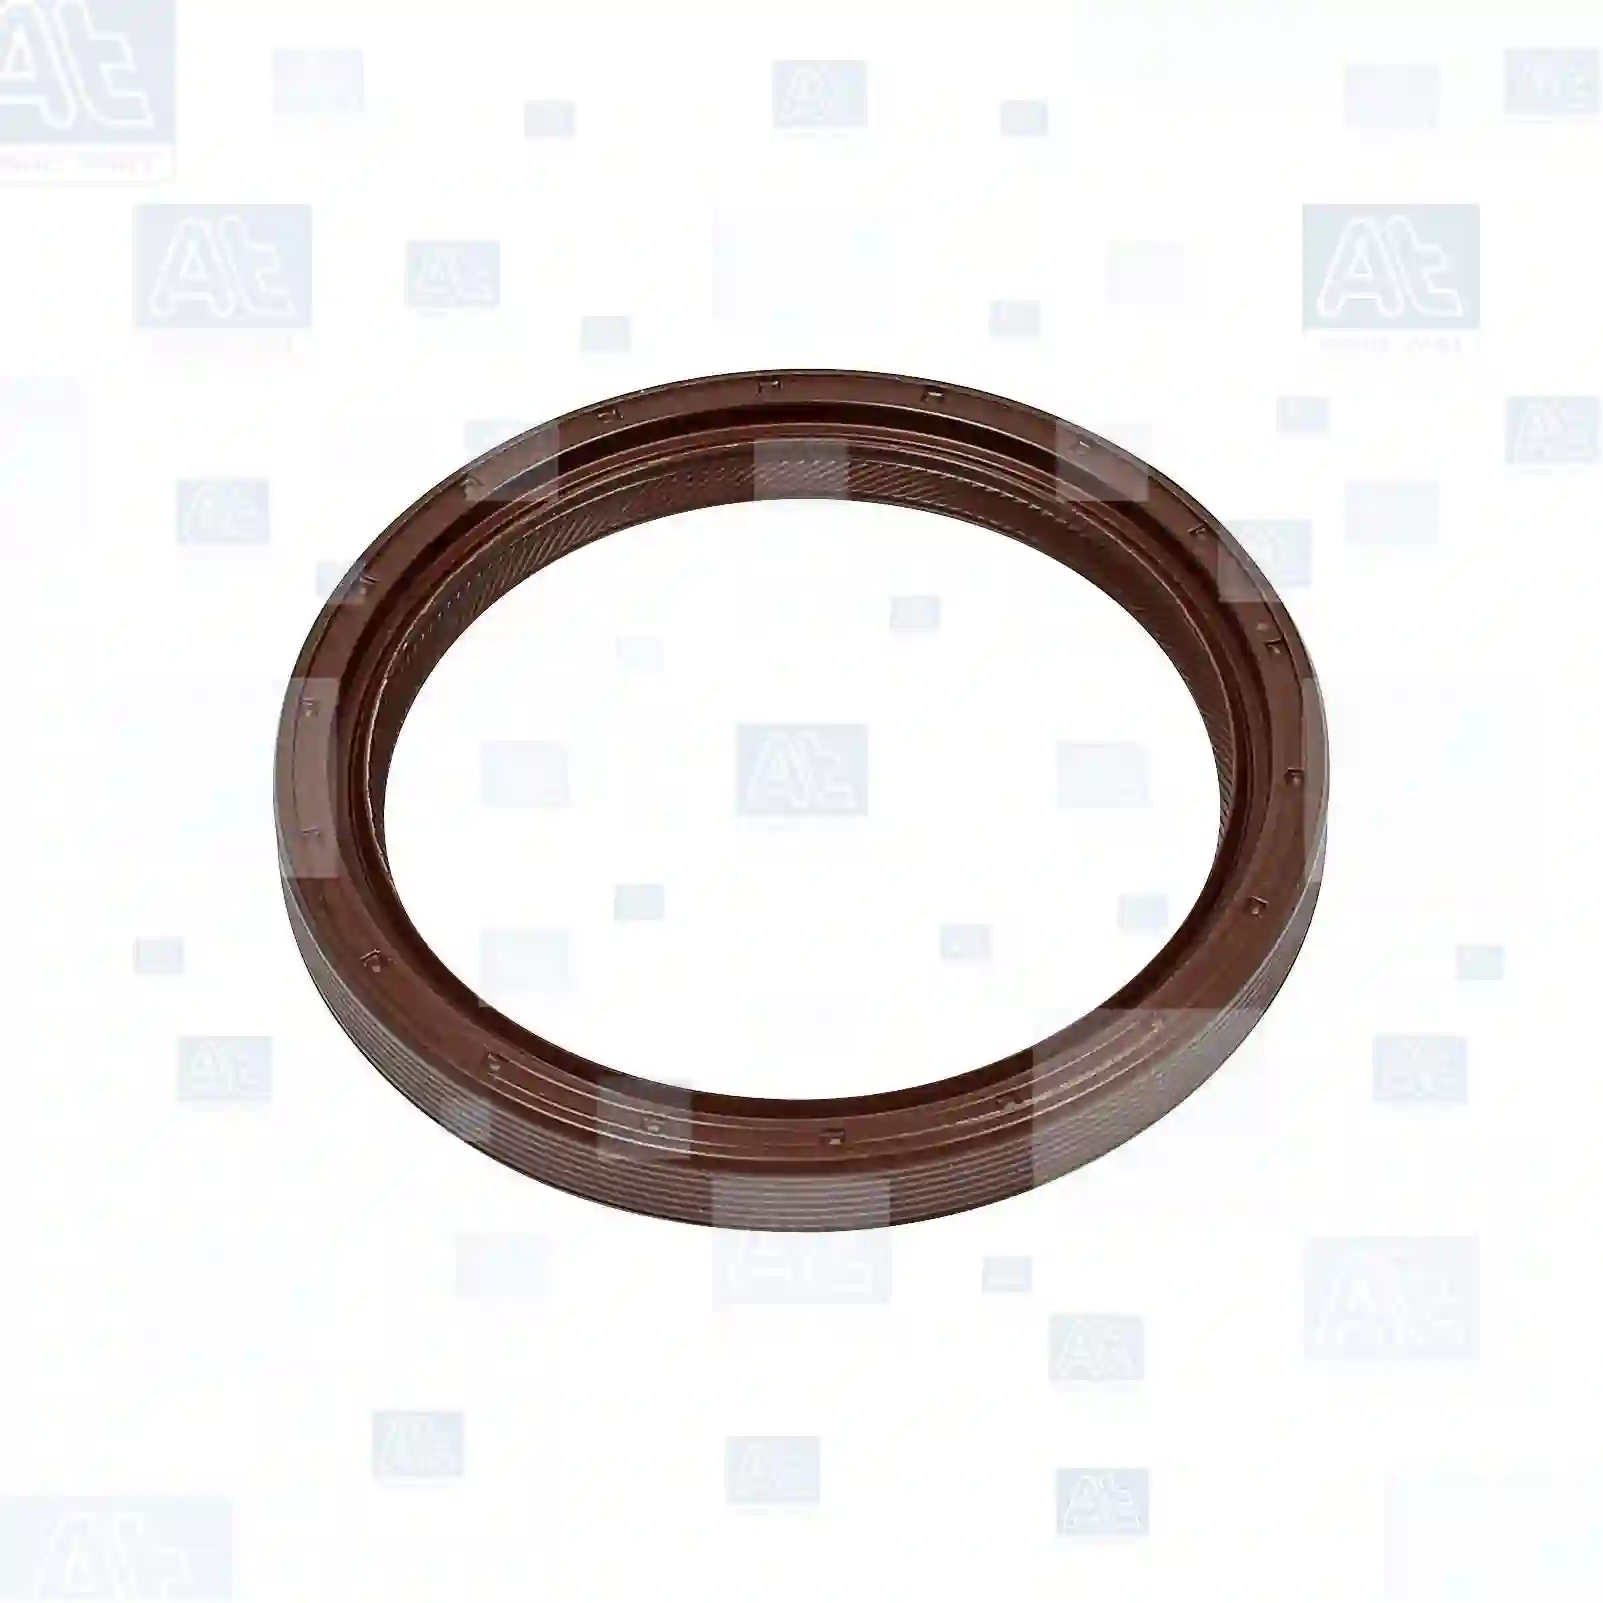 Oil seal, 77700586, 026103051A, 026103051B, 026103171, 026103171B, 026103171D, 028103171, 028103171B, 028103171D, 028103171K, 047103085A, 049103051C, 051103172, 051103172A, 052103051A, 053103173, 055103173B, 056103051D, 056103173B, 068103051A, 068103051B, 068103051G, 068103051P, 068103053, 068103071F, 068103171F, 068103171G, 068198171, 1005303, 1078729, 0000150245, M862835, 026103051A, 026103051B, 026103171B, 026103171D, 028103171, 028103171B, 028103171D, 028103171K, 047103085A, 053103173, 056103051D, 068103051G, 068103051P, 068103053, 068103171F, 068103171G, 068198171, 026103171B, 026103171D, 028103171, 028103171B, 028103171D, 028103171K, 047103085A, 056103051D, 068103051G, 068103051P, 068103171E, 068103171F, 068103171G, 068198171, 959085112, 1257049, 271680, 3547000, 9438594, 026103051A, 026103171, 026103171B, 026103171D, 028103171, 028103171B, 028103171D, 028103171K, 032104023L, 047103085A, 049103051C, 051103172, 051103172A, 052103051A, 053103173, 055103173B, 056103051D, 056103173B, 068103051A, 068103051B, 068103051G, 068103051P, 068103171, 068103171E, 068103171F, 068103171FS, 068103171G, 068103171GS, 068103171S, 068198171, 959085112, ZG02624-0008 ||  77700586 At Spare Part | Engine, Accelerator Pedal, Camshaft, Connecting Rod, Crankcase, Crankshaft, Cylinder Head, Engine Suspension Mountings, Exhaust Manifold, Exhaust Gas Recirculation, Filter Kits, Flywheel Housing, General Overhaul Kits, Engine, Intake Manifold, Oil Cleaner, Oil Cooler, Oil Filter, Oil Pump, Oil Sump, Piston & Liner, Sensor & Switch, Timing Case, Turbocharger, Cooling System, Belt Tensioner, Coolant Filter, Coolant Pipe, Corrosion Prevention Agent, Drive, Expansion Tank, Fan, Intercooler, Monitors & Gauges, Radiator, Thermostat, V-Belt / Timing belt, Water Pump, Fuel System, Electronical Injector Unit, Feed Pump, Fuel Filter, cpl., Fuel Gauge Sender,  Fuel Line, Fuel Pump, Fuel Tank, Injection Line Kit, Injection Pump, Exhaust System, Clutch & Pedal, Gearbox, Propeller Shaft, Axles, Brake System, Hubs & Wheels, Suspension, Leaf Spring, Universal Parts / Accessories, Steering, Electrical System, Cabin Oil seal, 77700586, 026103051A, 026103051B, 026103171, 026103171B, 026103171D, 028103171, 028103171B, 028103171D, 028103171K, 047103085A, 049103051C, 051103172, 051103172A, 052103051A, 053103173, 055103173B, 056103051D, 056103173B, 068103051A, 068103051B, 068103051G, 068103051P, 068103053, 068103071F, 068103171F, 068103171G, 068198171, 1005303, 1078729, 0000150245, M862835, 026103051A, 026103051B, 026103171B, 026103171D, 028103171, 028103171B, 028103171D, 028103171K, 047103085A, 053103173, 056103051D, 068103051G, 068103051P, 068103053, 068103171F, 068103171G, 068198171, 026103171B, 026103171D, 028103171, 028103171B, 028103171D, 028103171K, 047103085A, 056103051D, 068103051G, 068103051P, 068103171E, 068103171F, 068103171G, 068198171, 959085112, 1257049, 271680, 3547000, 9438594, 026103051A, 026103171, 026103171B, 026103171D, 028103171, 028103171B, 028103171D, 028103171K, 032104023L, 047103085A, 049103051C, 051103172, 051103172A, 052103051A, 053103173, 055103173B, 056103051D, 056103173B, 068103051A, 068103051B, 068103051G, 068103051P, 068103171, 068103171E, 068103171F, 068103171FS, 068103171G, 068103171GS, 068103171S, 068198171, 959085112, ZG02624-0008 ||  77700586 At Spare Part | Engine, Accelerator Pedal, Camshaft, Connecting Rod, Crankcase, Crankshaft, Cylinder Head, Engine Suspension Mountings, Exhaust Manifold, Exhaust Gas Recirculation, Filter Kits, Flywheel Housing, General Overhaul Kits, Engine, Intake Manifold, Oil Cleaner, Oil Cooler, Oil Filter, Oil Pump, Oil Sump, Piston & Liner, Sensor & Switch, Timing Case, Turbocharger, Cooling System, Belt Tensioner, Coolant Filter, Coolant Pipe, Corrosion Prevention Agent, Drive, Expansion Tank, Fan, Intercooler, Monitors & Gauges, Radiator, Thermostat, V-Belt / Timing belt, Water Pump, Fuel System, Electronical Injector Unit, Feed Pump, Fuel Filter, cpl., Fuel Gauge Sender,  Fuel Line, Fuel Pump, Fuel Tank, Injection Line Kit, Injection Pump, Exhaust System, Clutch & Pedal, Gearbox, Propeller Shaft, Axles, Brake System, Hubs & Wheels, Suspension, Leaf Spring, Universal Parts / Accessories, Steering, Electrical System, Cabin